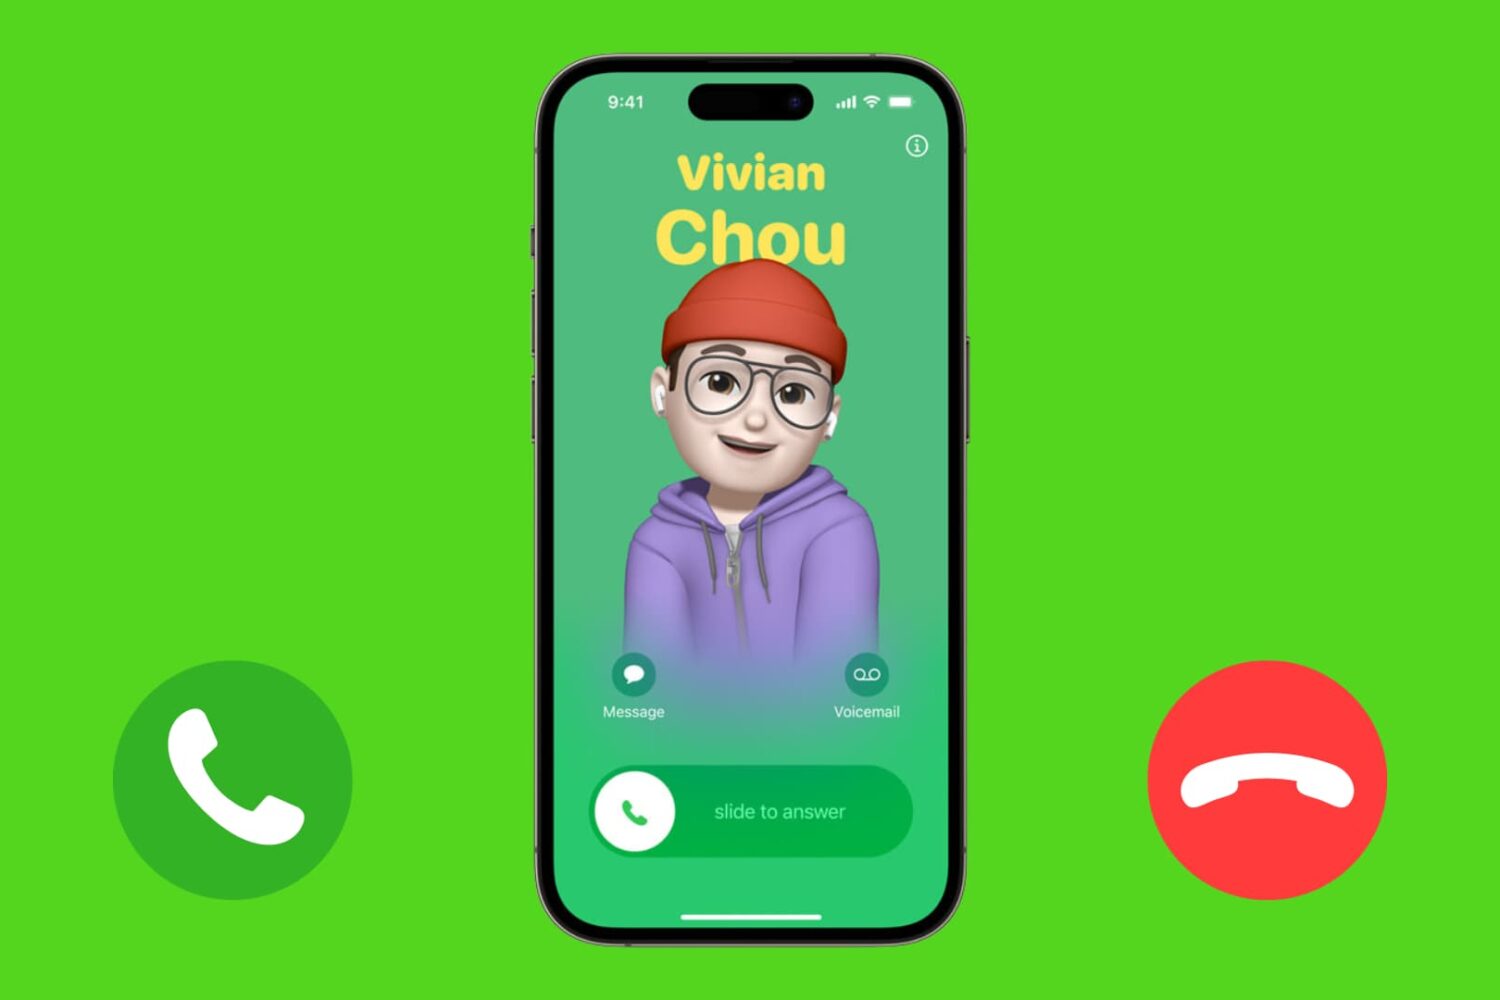 Incoming phone call on iPhone with green accept and red hang up buttons